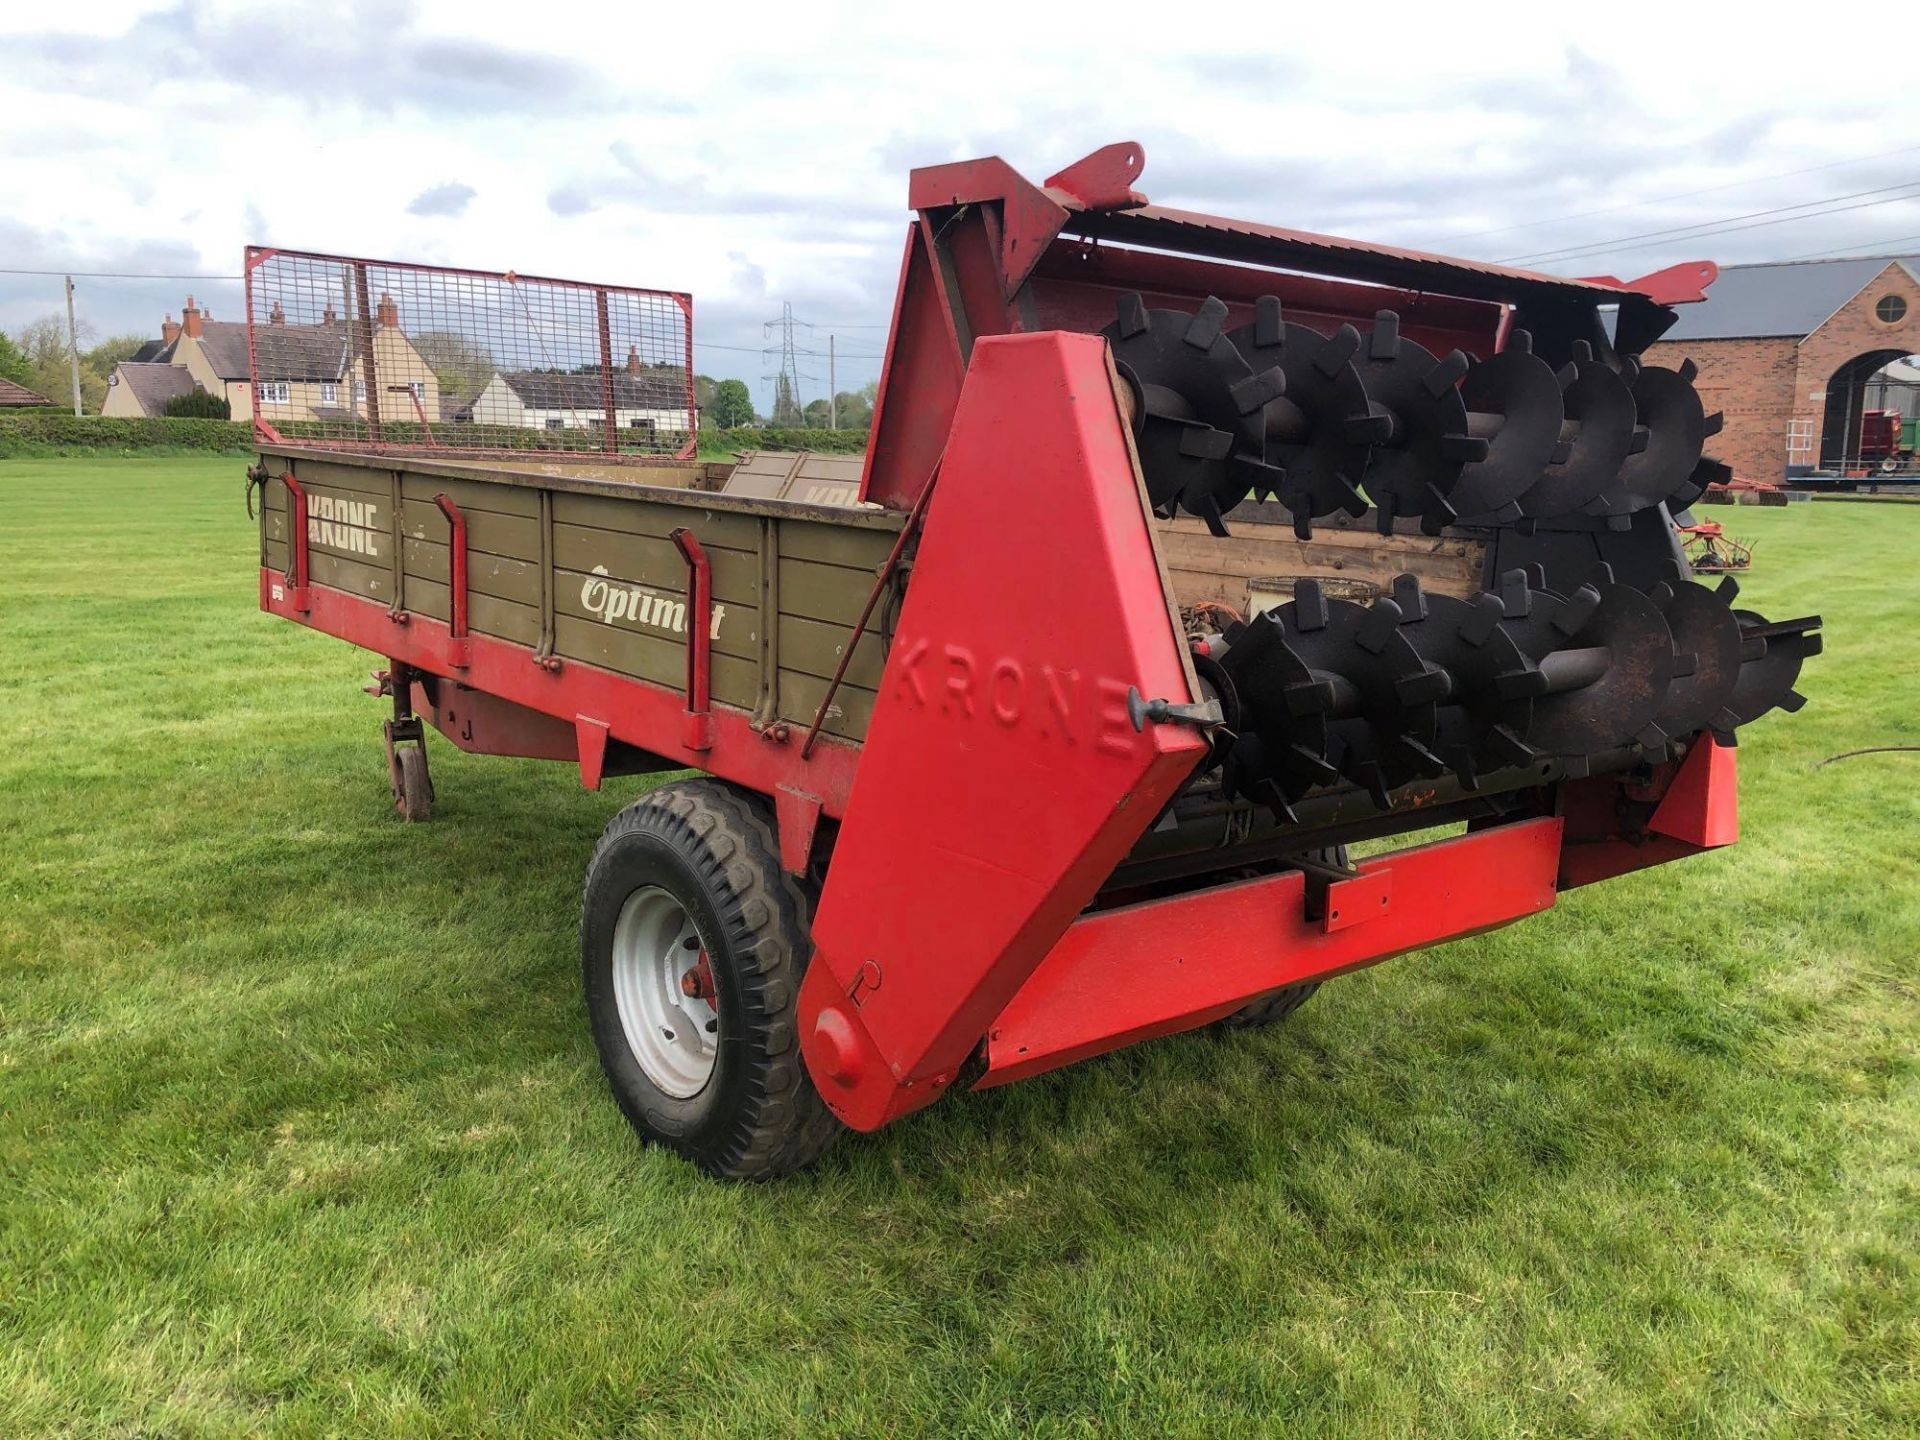 1978 Krone Optimat 4t rear discharge manure spreader with walking floor on 11.5/80-15 wheels and tyr - Image 6 of 6